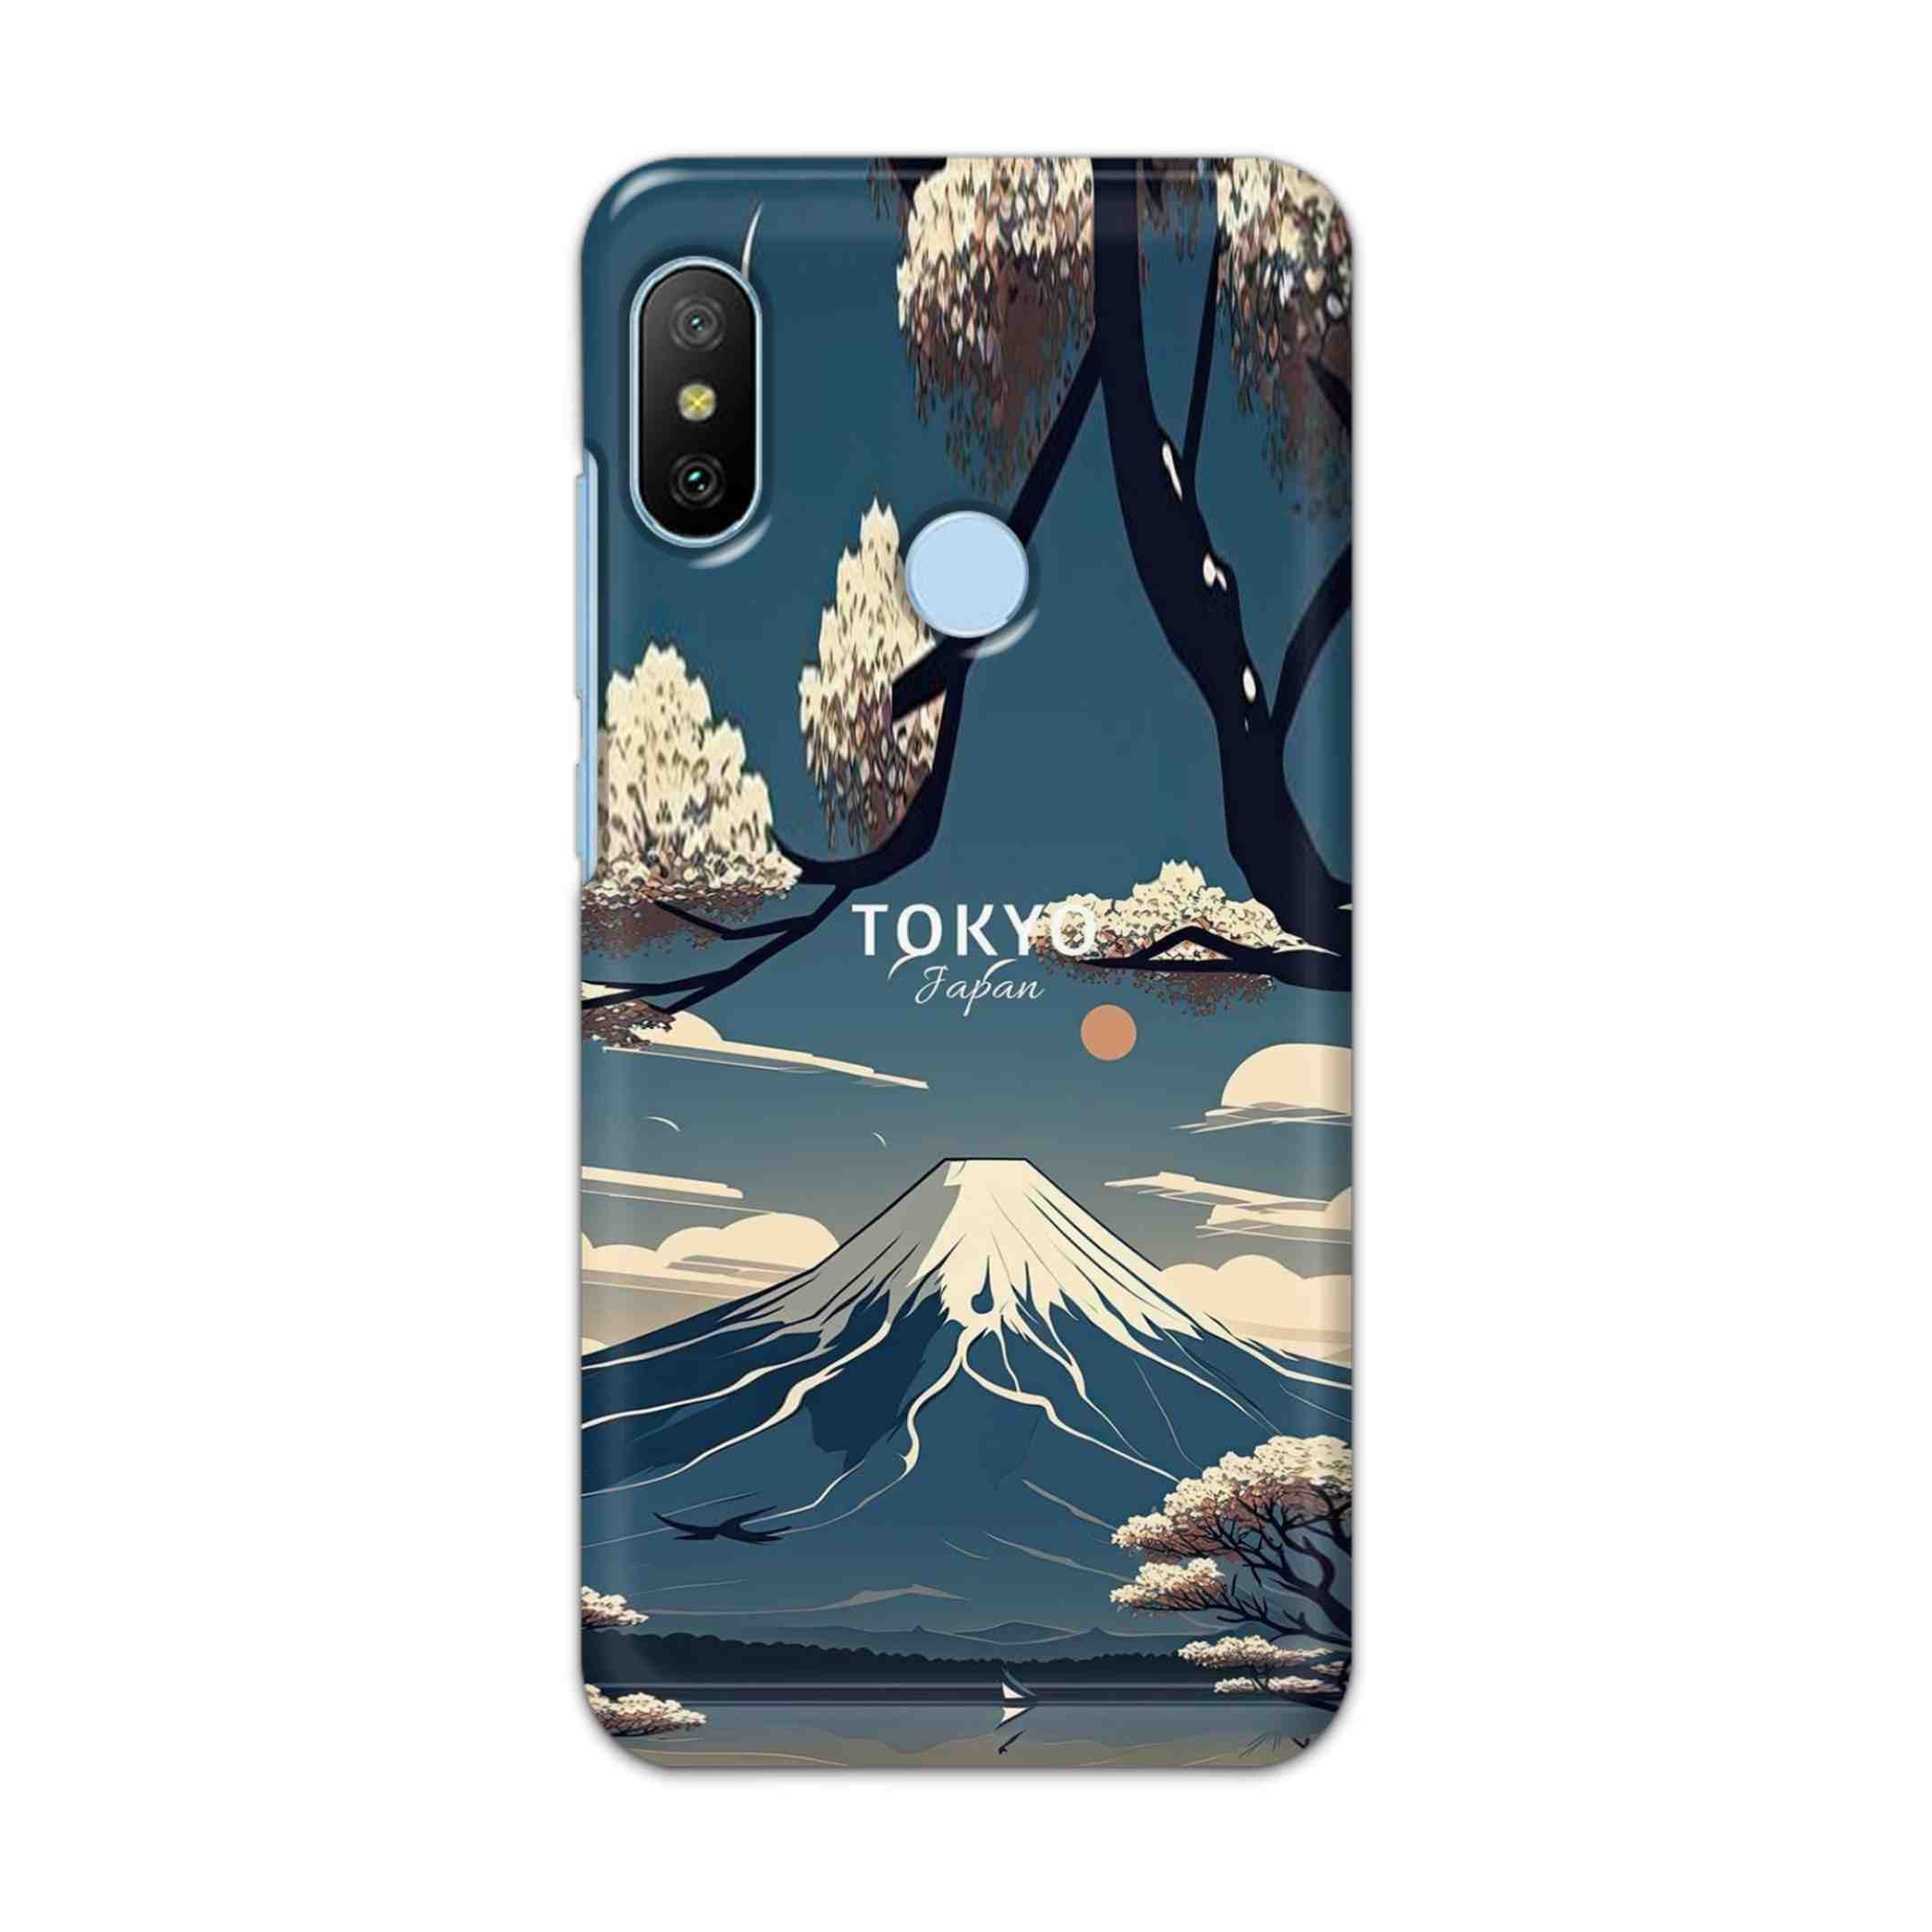 Buy Tokyo Hard Back Mobile Phone Case/Cover For Xiaomi Redmi 6 Pro Online